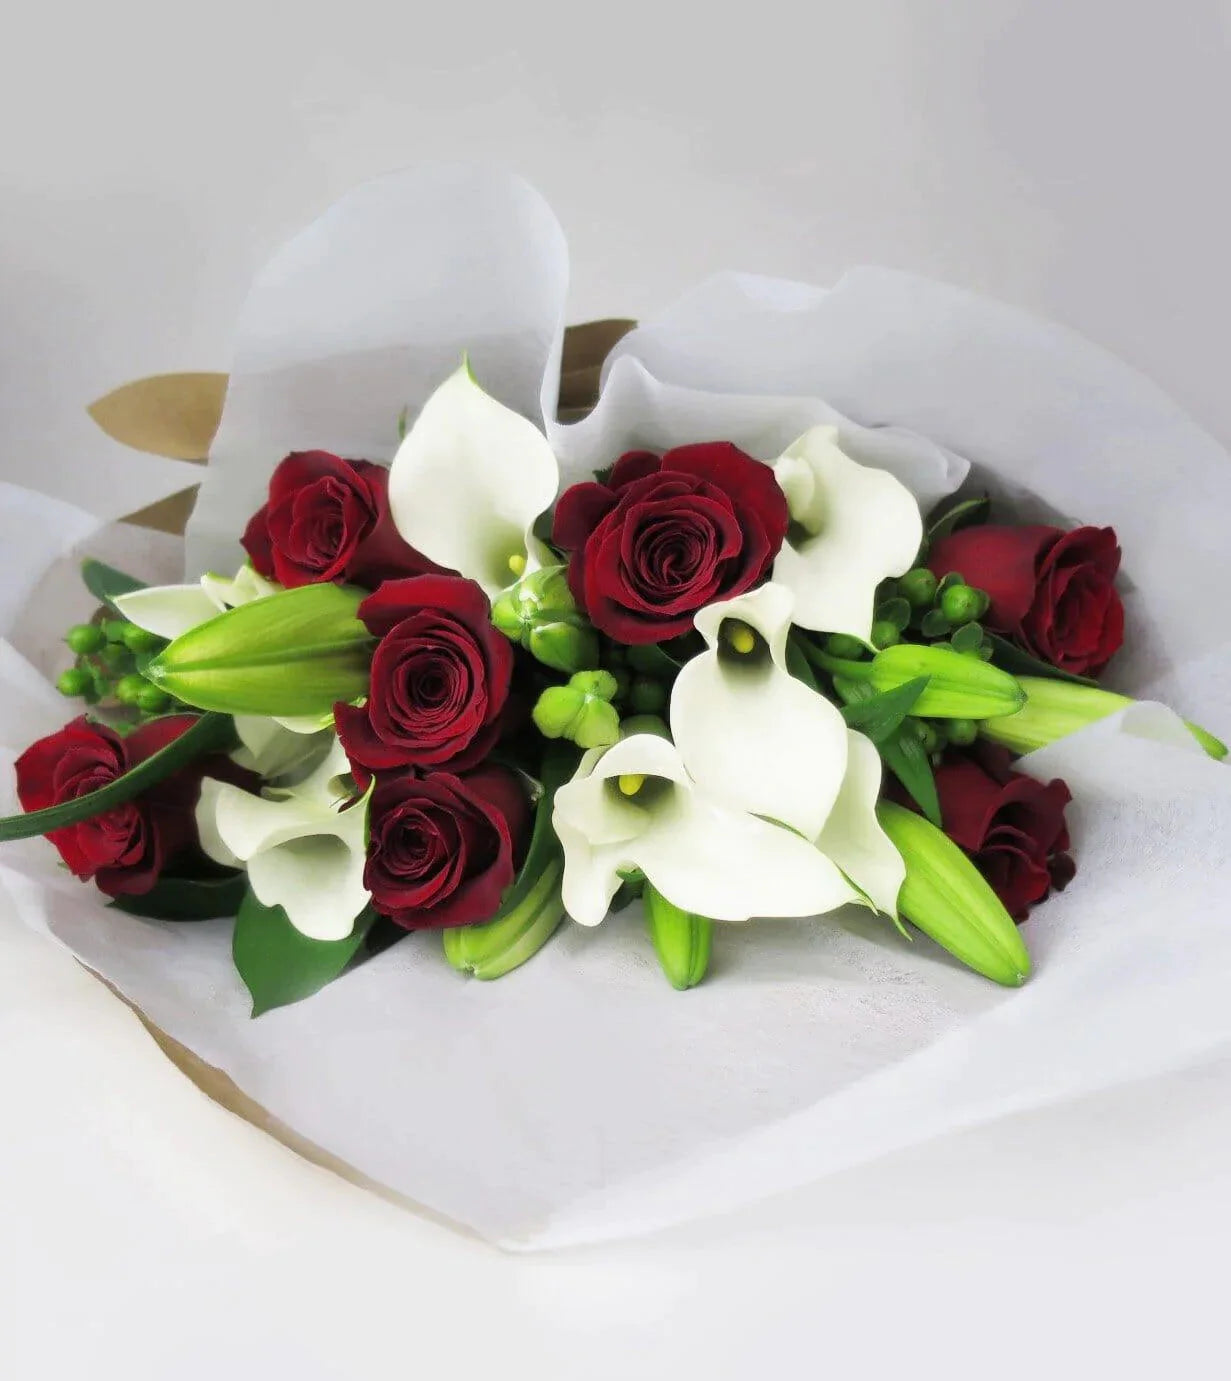 Grand Occasion Bouquet™ - bouquet with Red roses, white Mini Calla and Asiatic Lilies are arranged with Green Hypericum and Ruscus